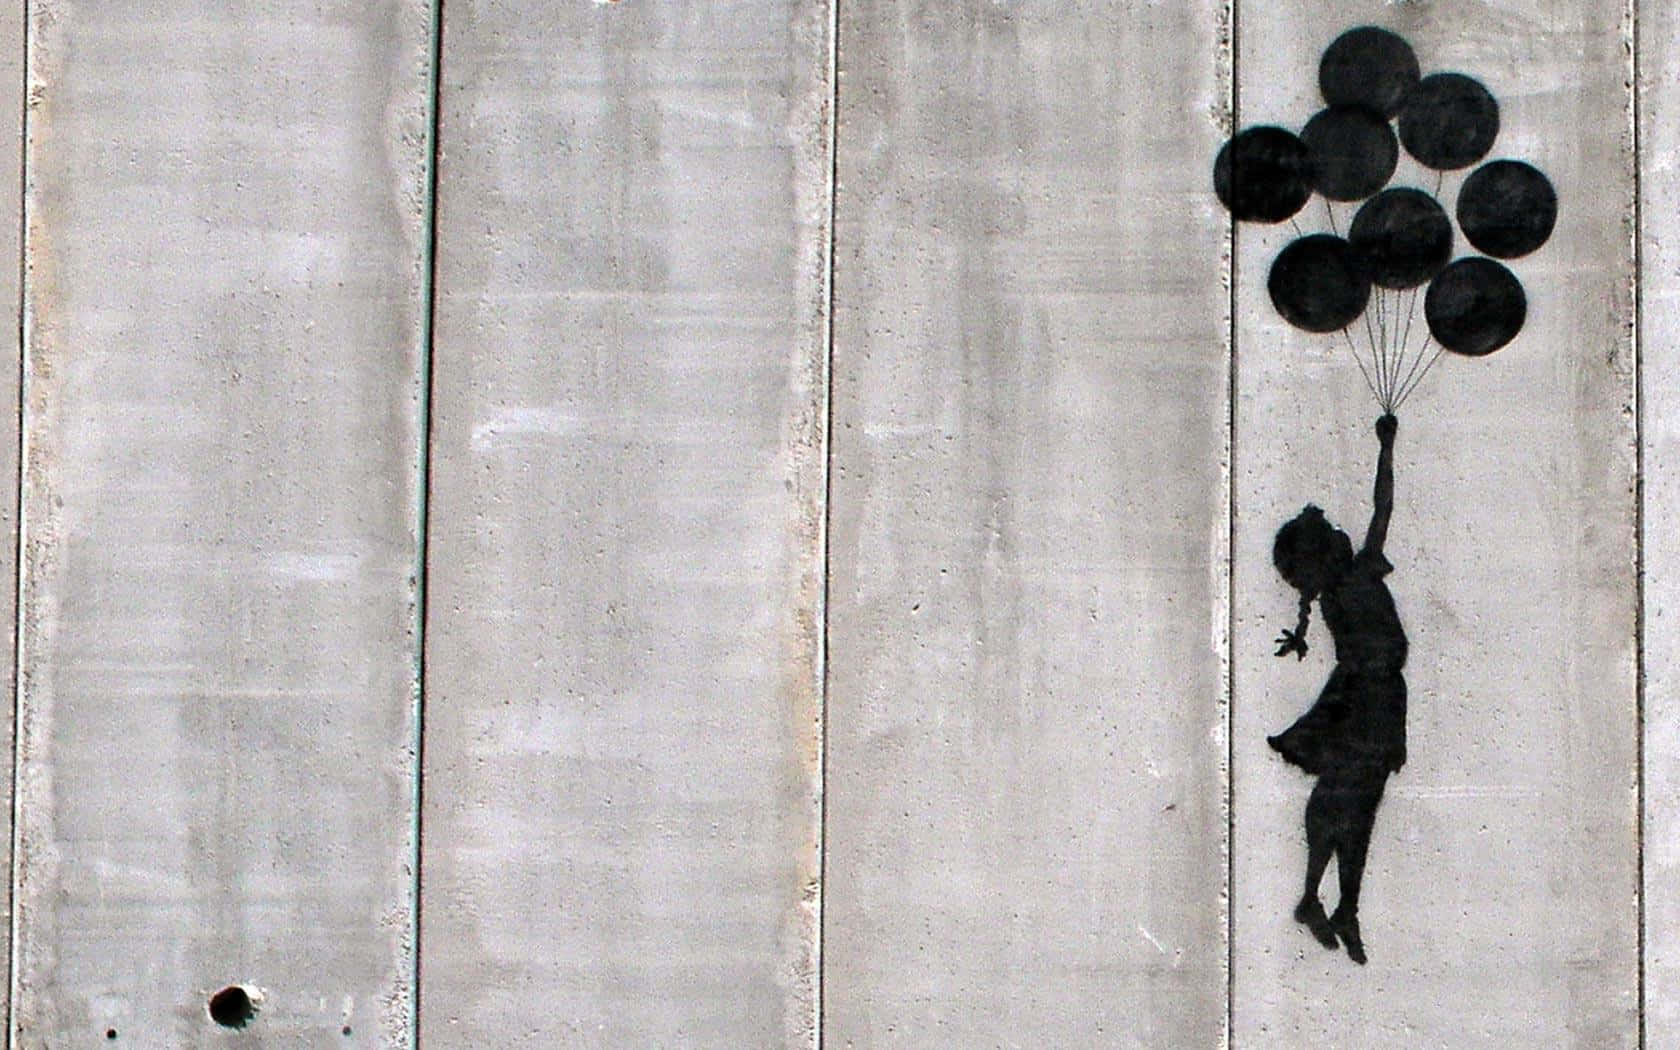 The rat perched on the man's fist - "A Banksy reflection"